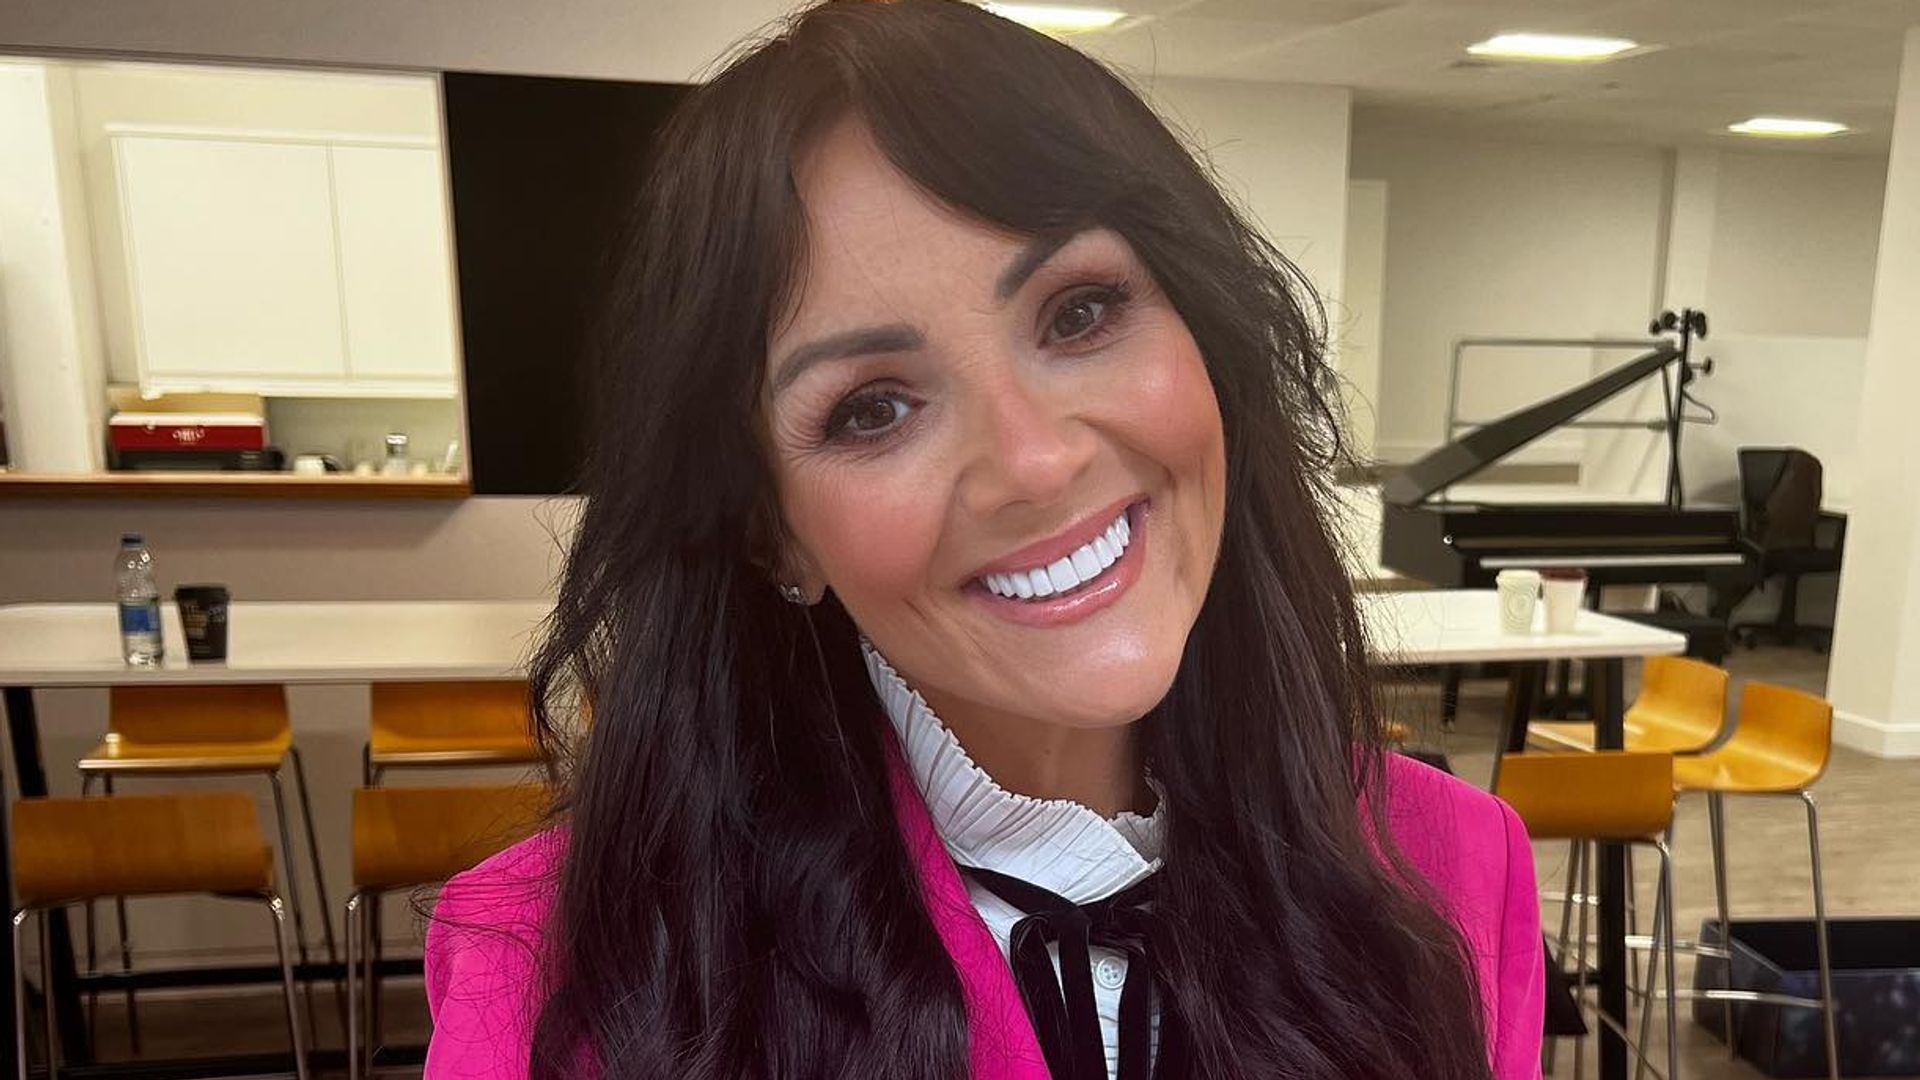 Martine McCutcheon in a close up photo smiling and wearing a magenta blazer